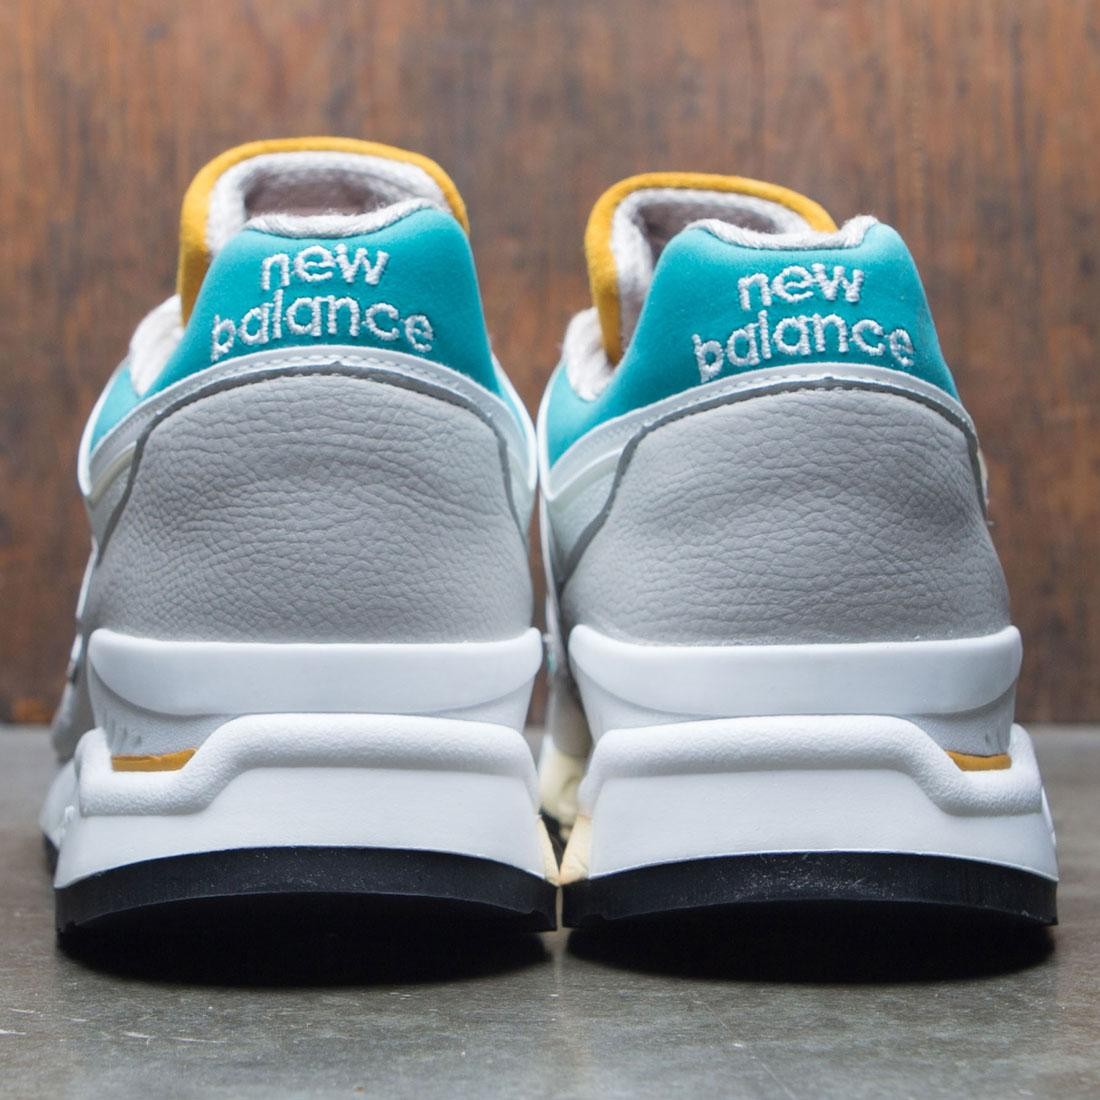 New Balance x Concepts Men 997.5 Esplanade M9975CN - Made In USA (gray /  teal / white)